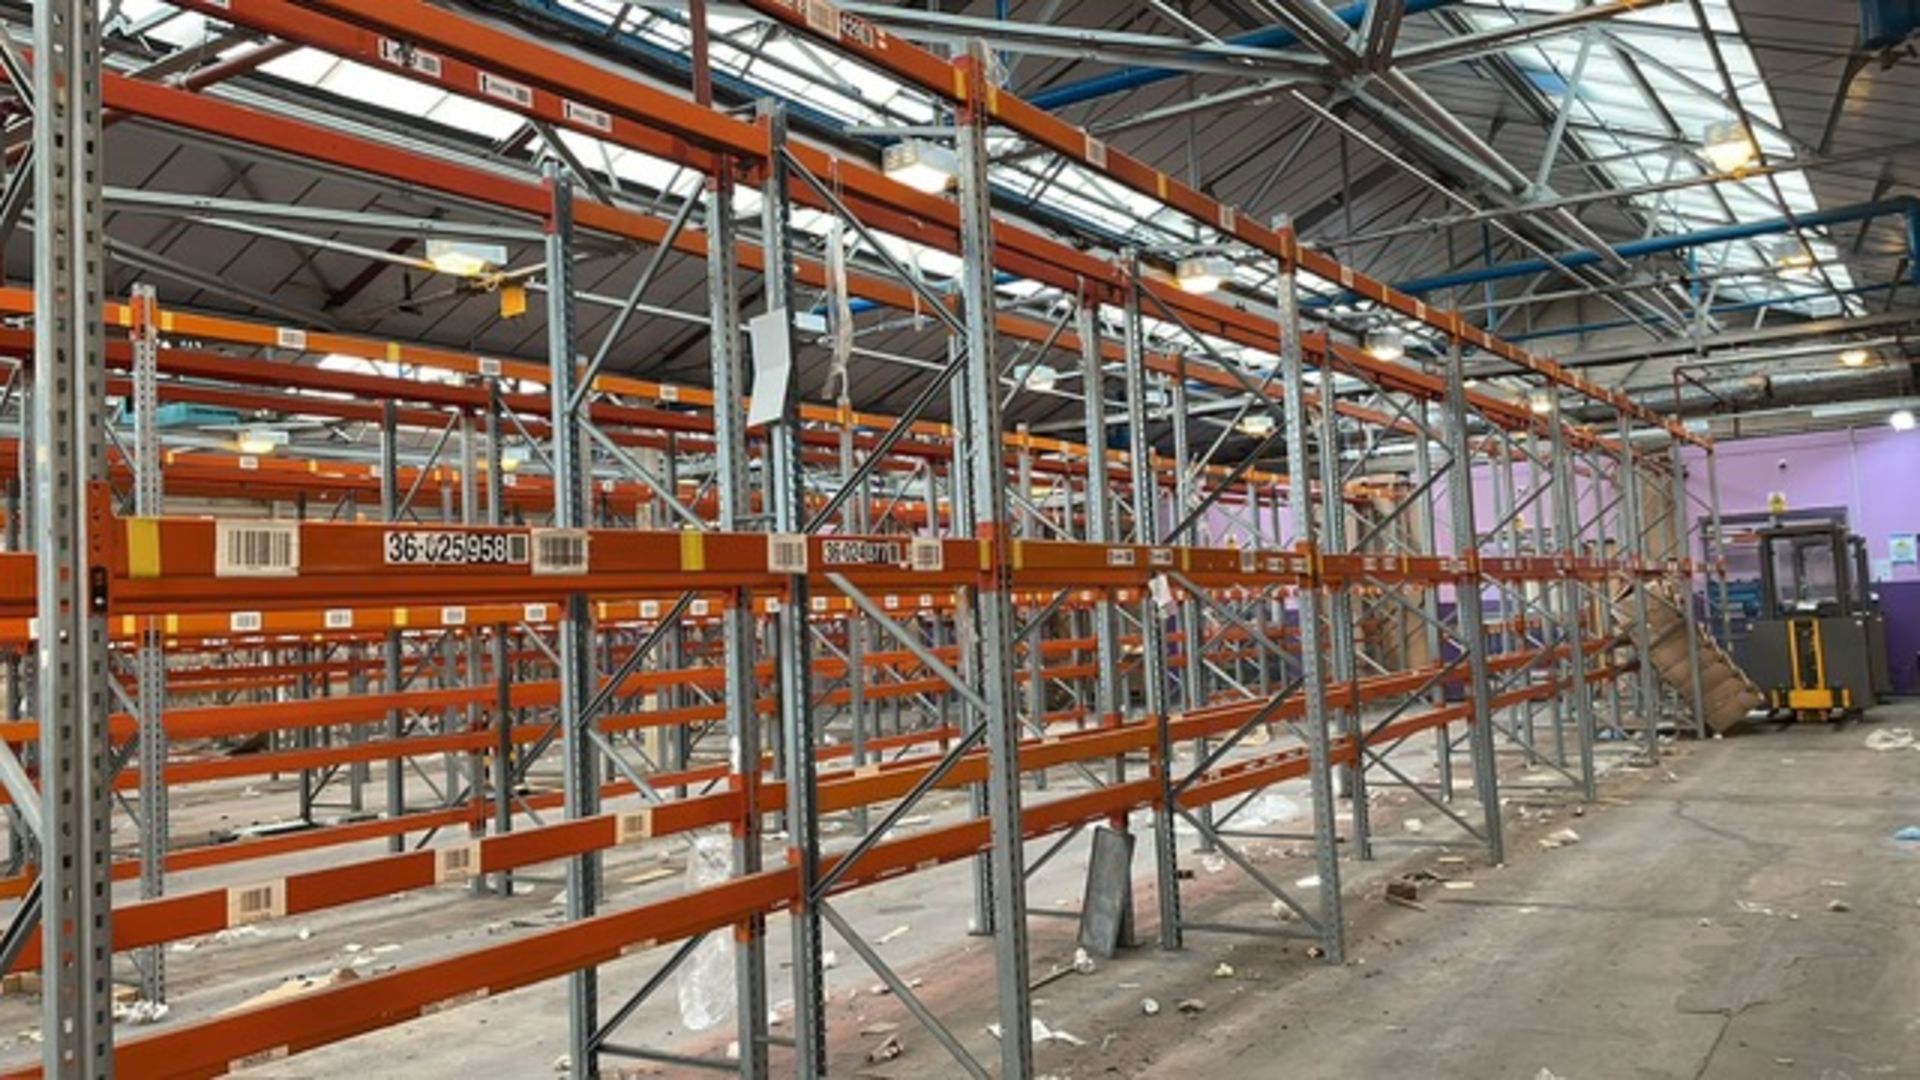 14 Joined Bays Of Dexion P90, 2 Levels Per Bay, 15 Frames and 84 Beams (1500kg UDL), each frame